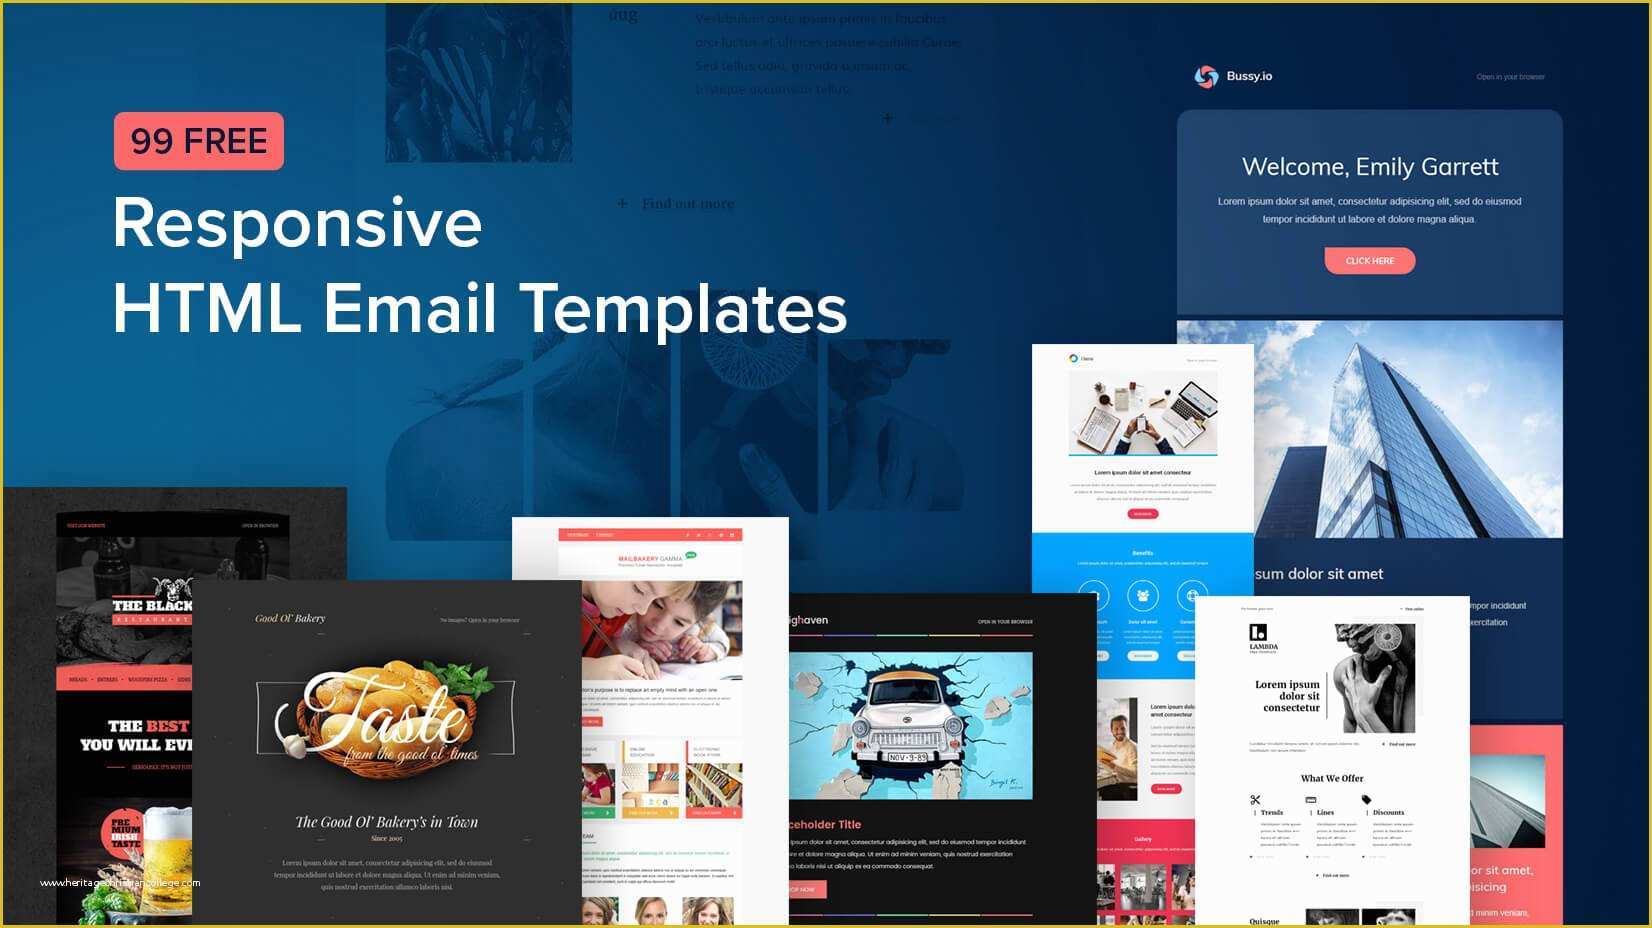 Free HTML Email Template Of 99 Free Responsive HTML Email Templates to Grab In 2018